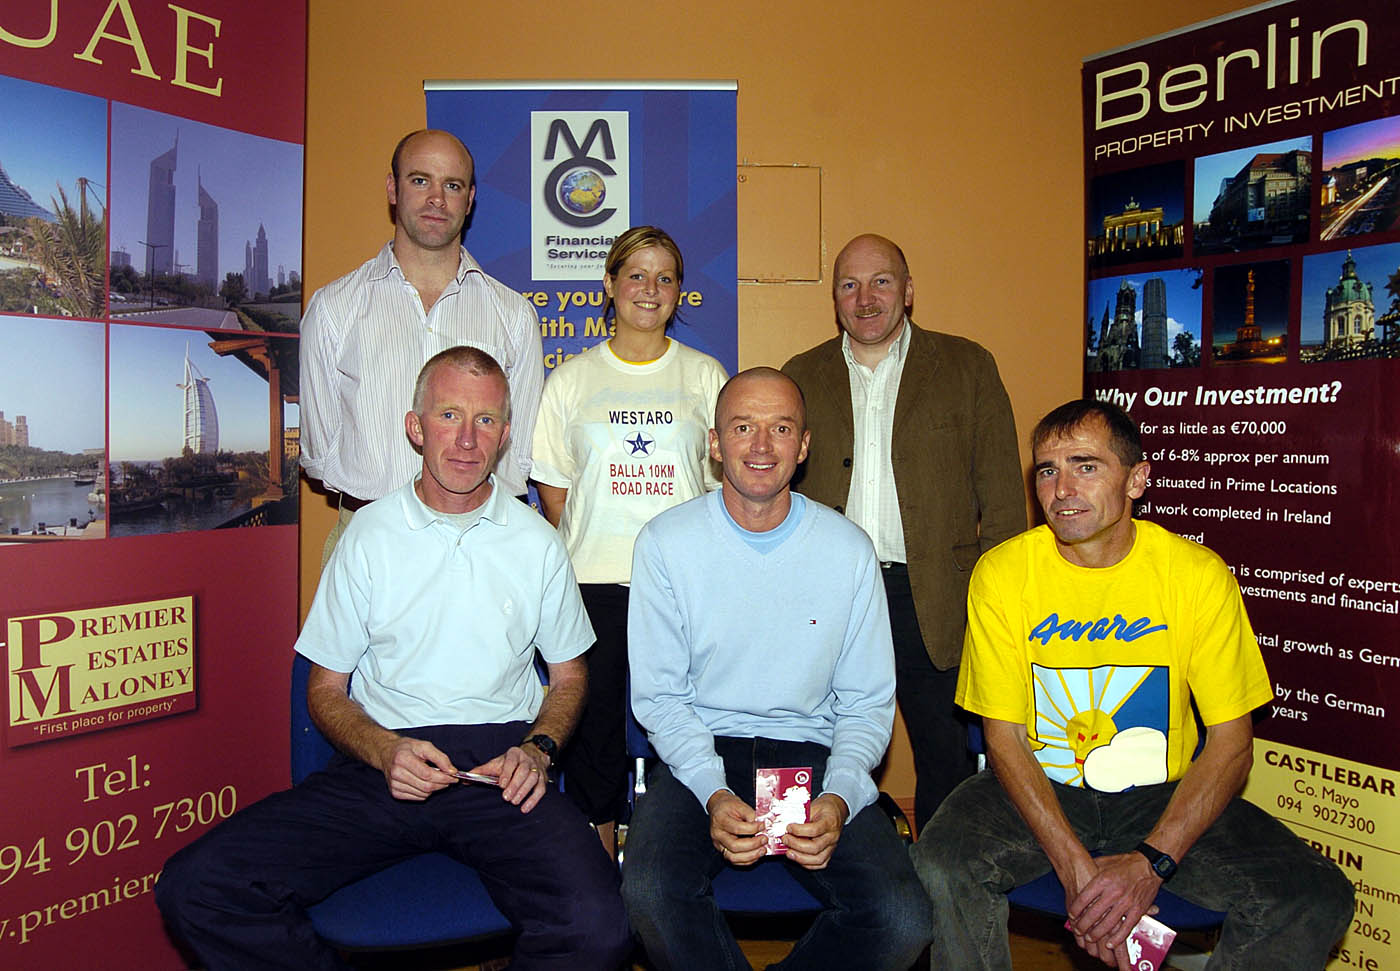 Balla 13th Annual 10K Road Race 2007, a group of winners of the Mens Over 40 Section pictured with some of the sponsors Front L-R: Tom Meehan 3rd Sligo AC, Michael OConnell 2nd Sligo AC, Paddy Mangan representing Domo Moran 1st Drumshoughlin. Back L-R: Clive Casey Premier Estates Maloney,(Sponser)Denise McIntyre Elvery Sports, ,(Sponser)Tom Connolly Premier Estates Maloney,(Sponser)
Photo  Ken Wright Photography 2007
